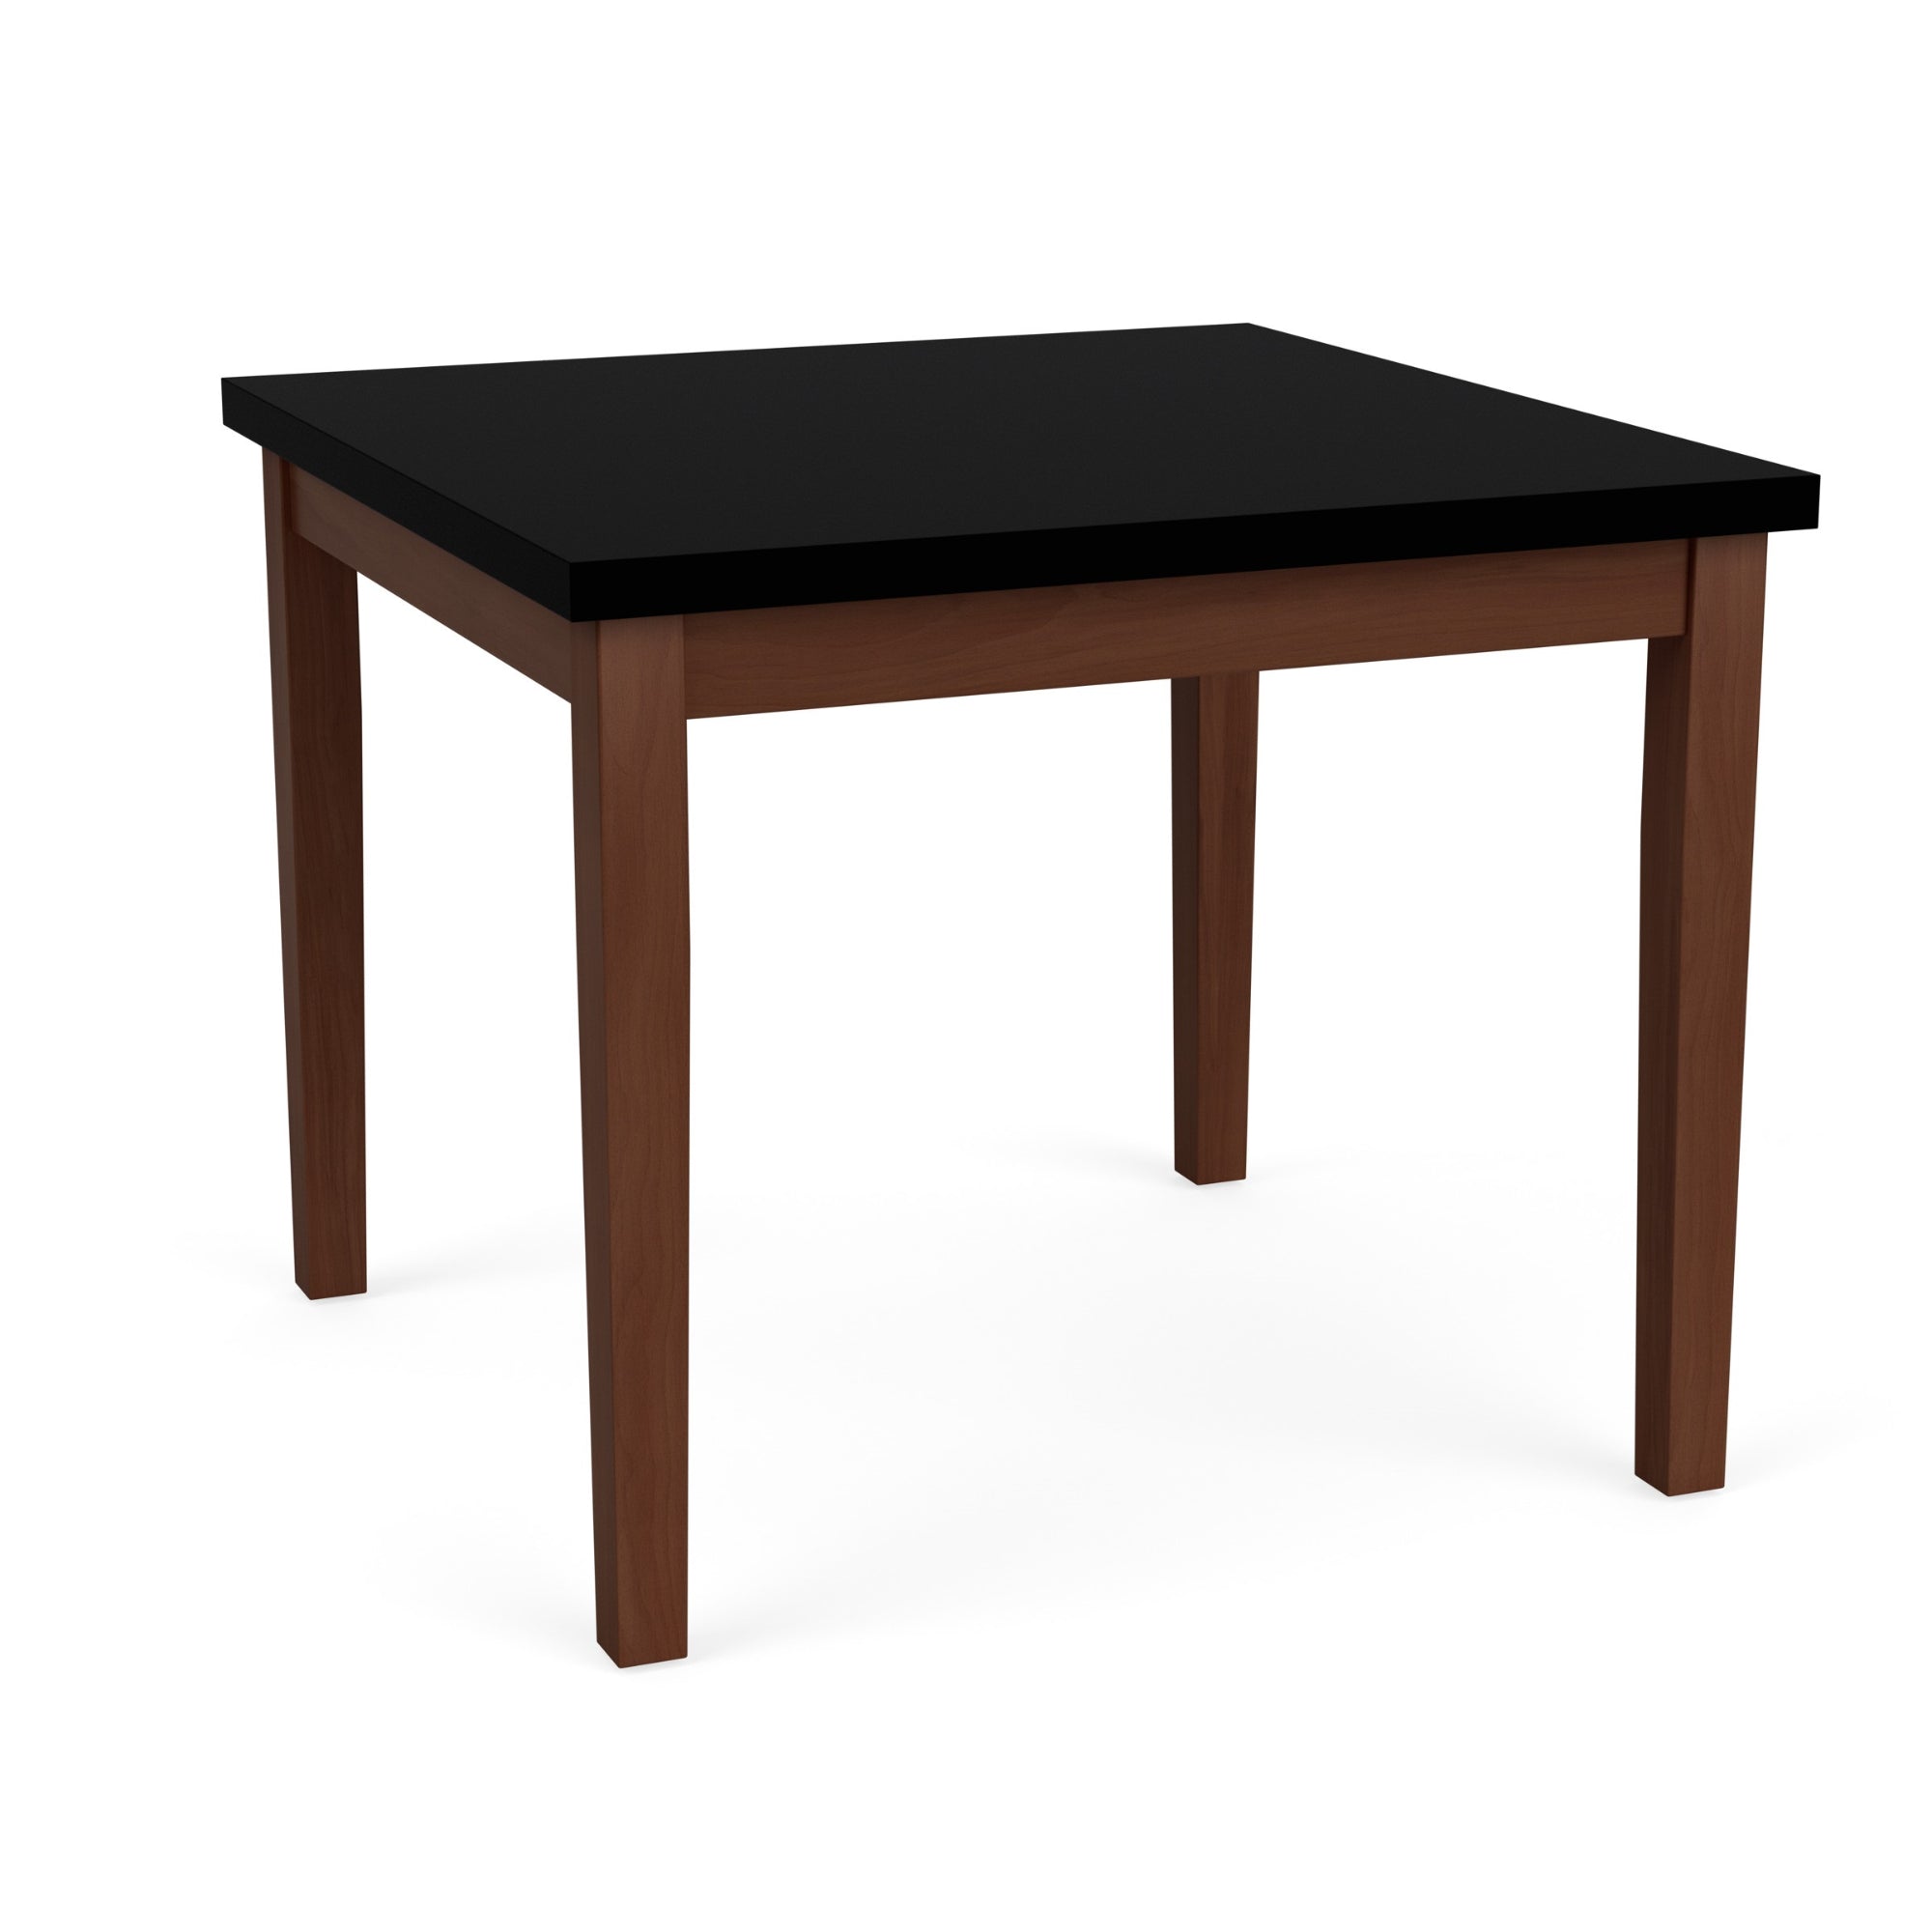 Lenox Wood Collection Corner Table, Black Laminate Tabletop, FREE SHIPPING